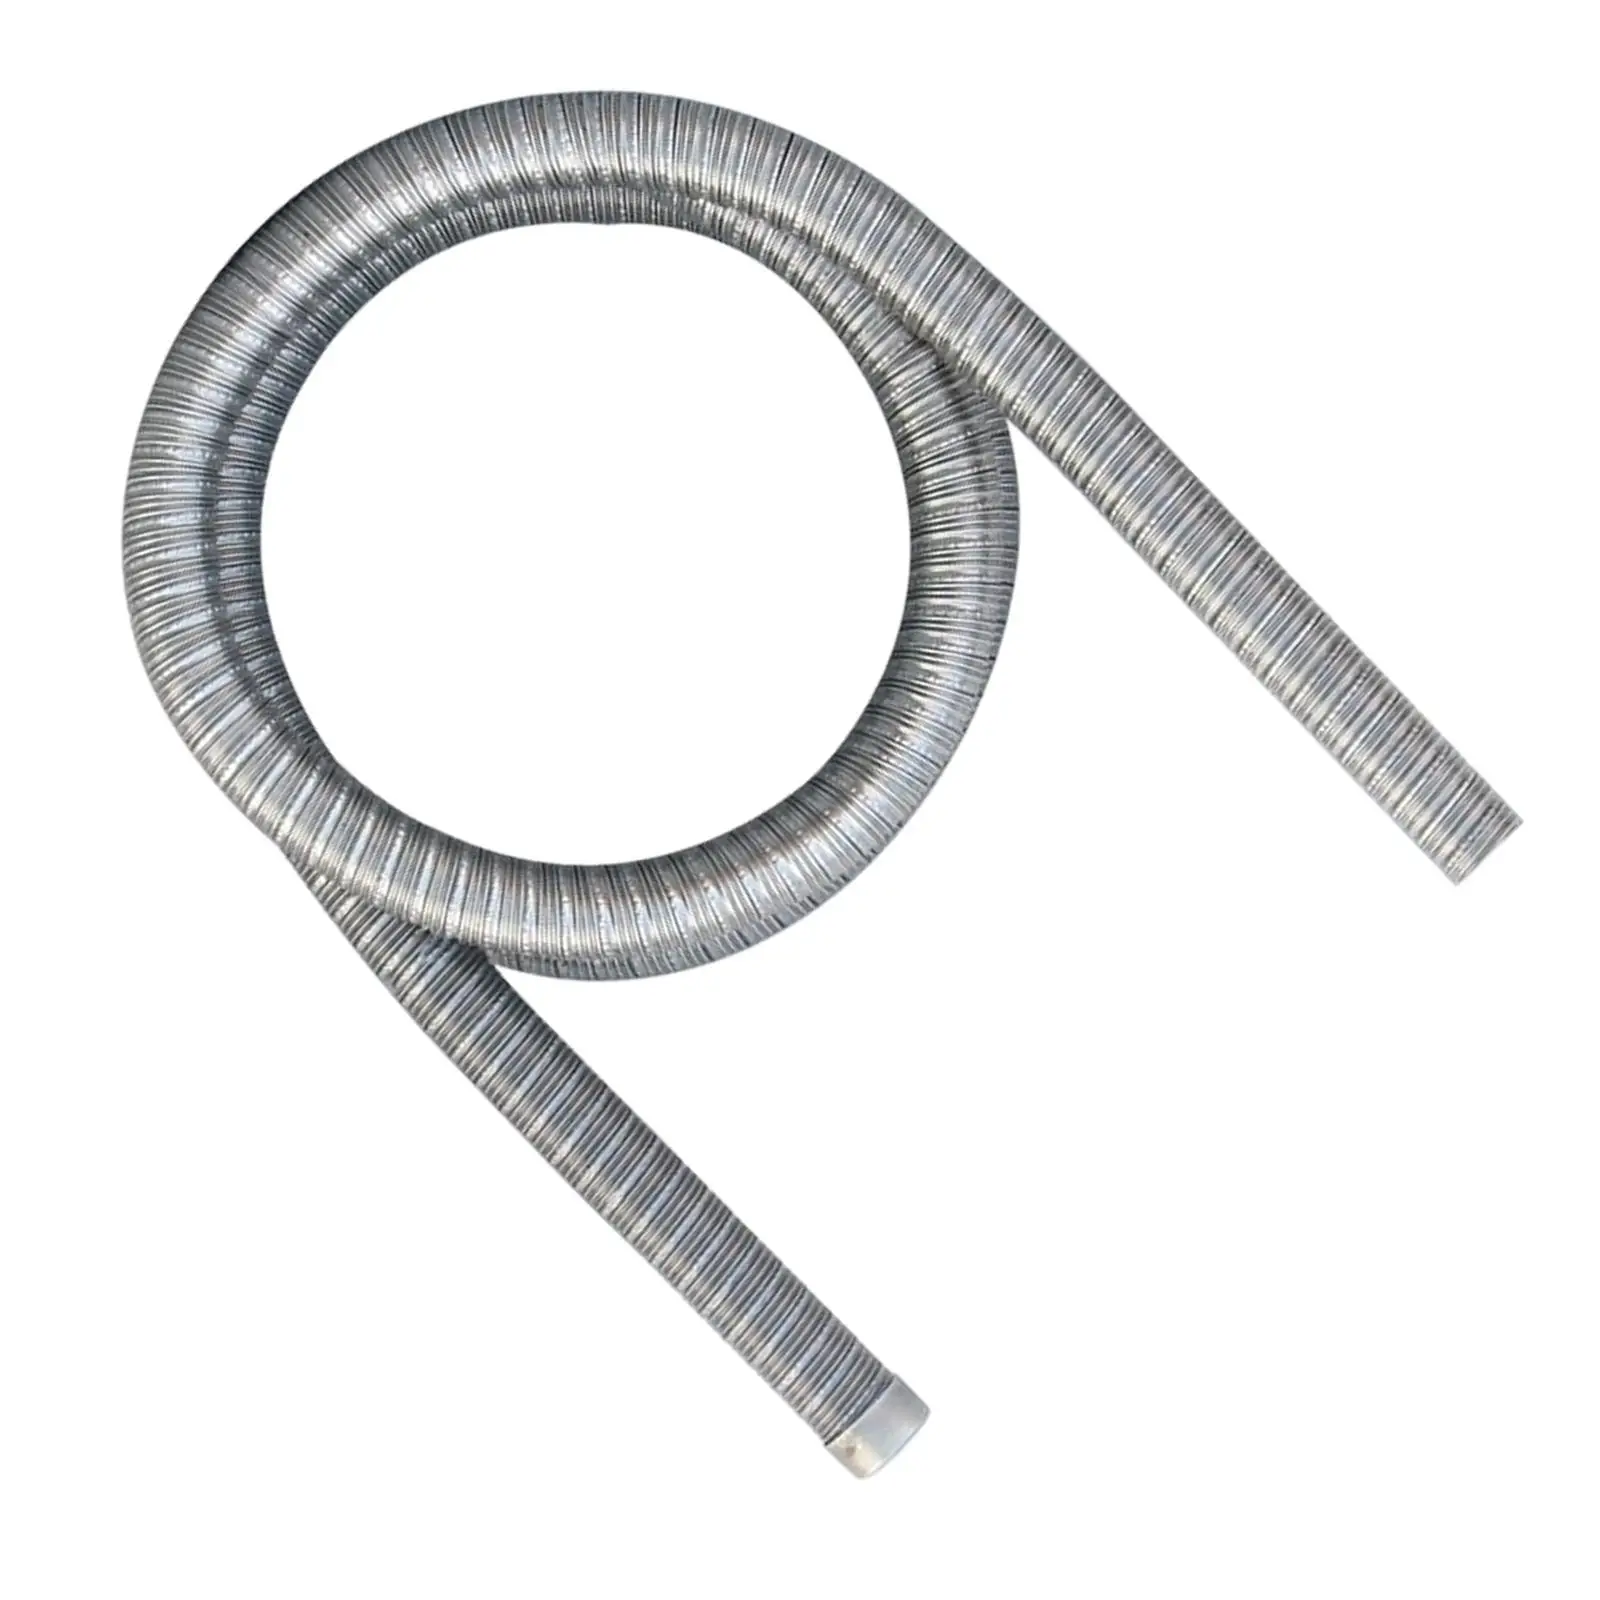 Parking Air Heater Exhaust Pipe 100cm Stainless Steel for Eberspacher Air  Heater Inner Diameter 2.4cm Replaces